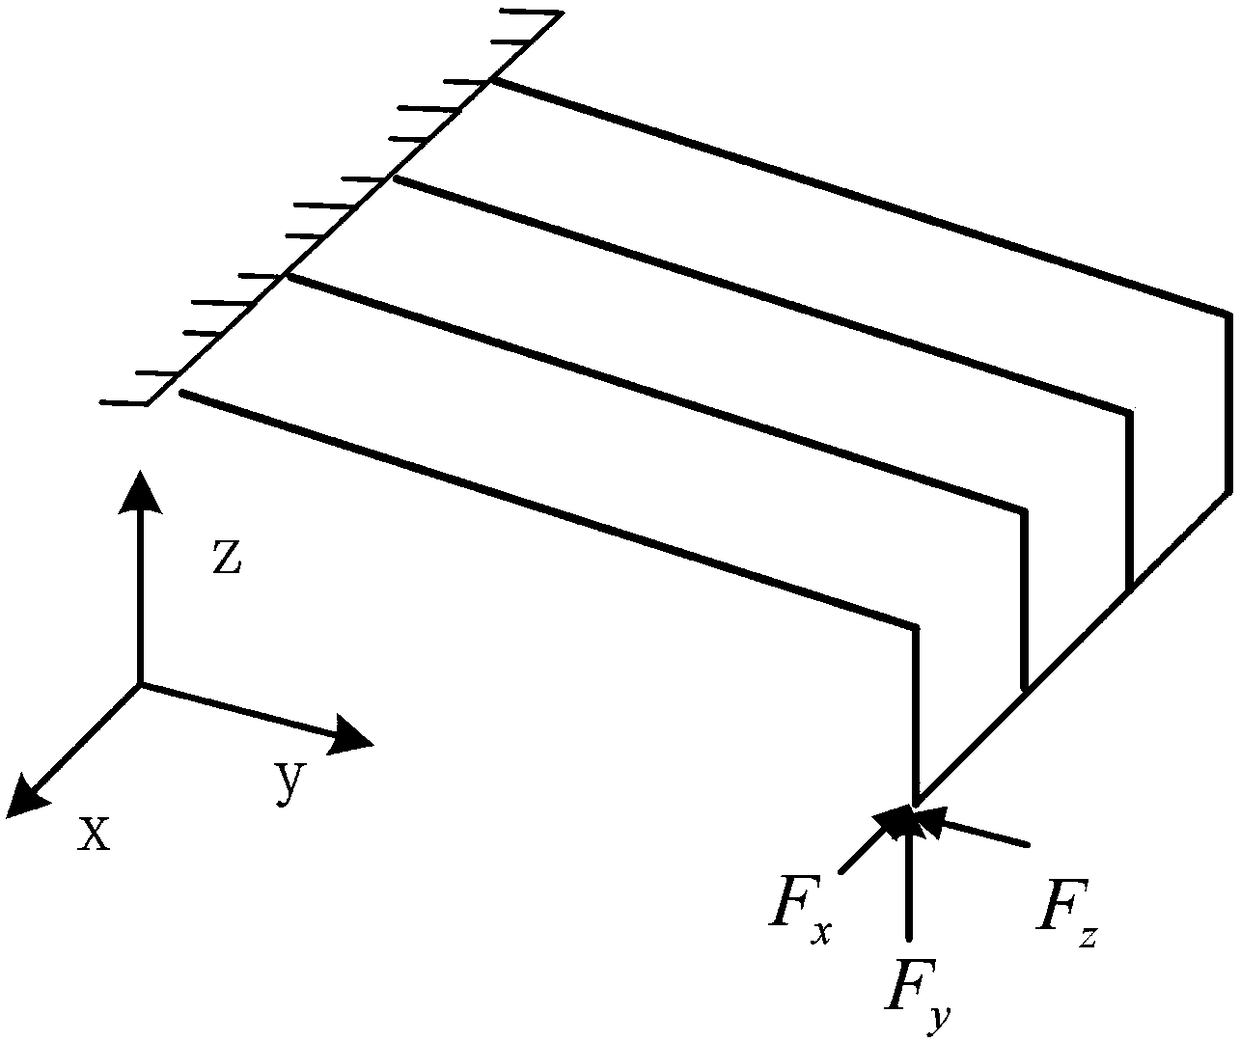 Integral cantilever structure buffer for three-dimensional buffering and vibration isolating